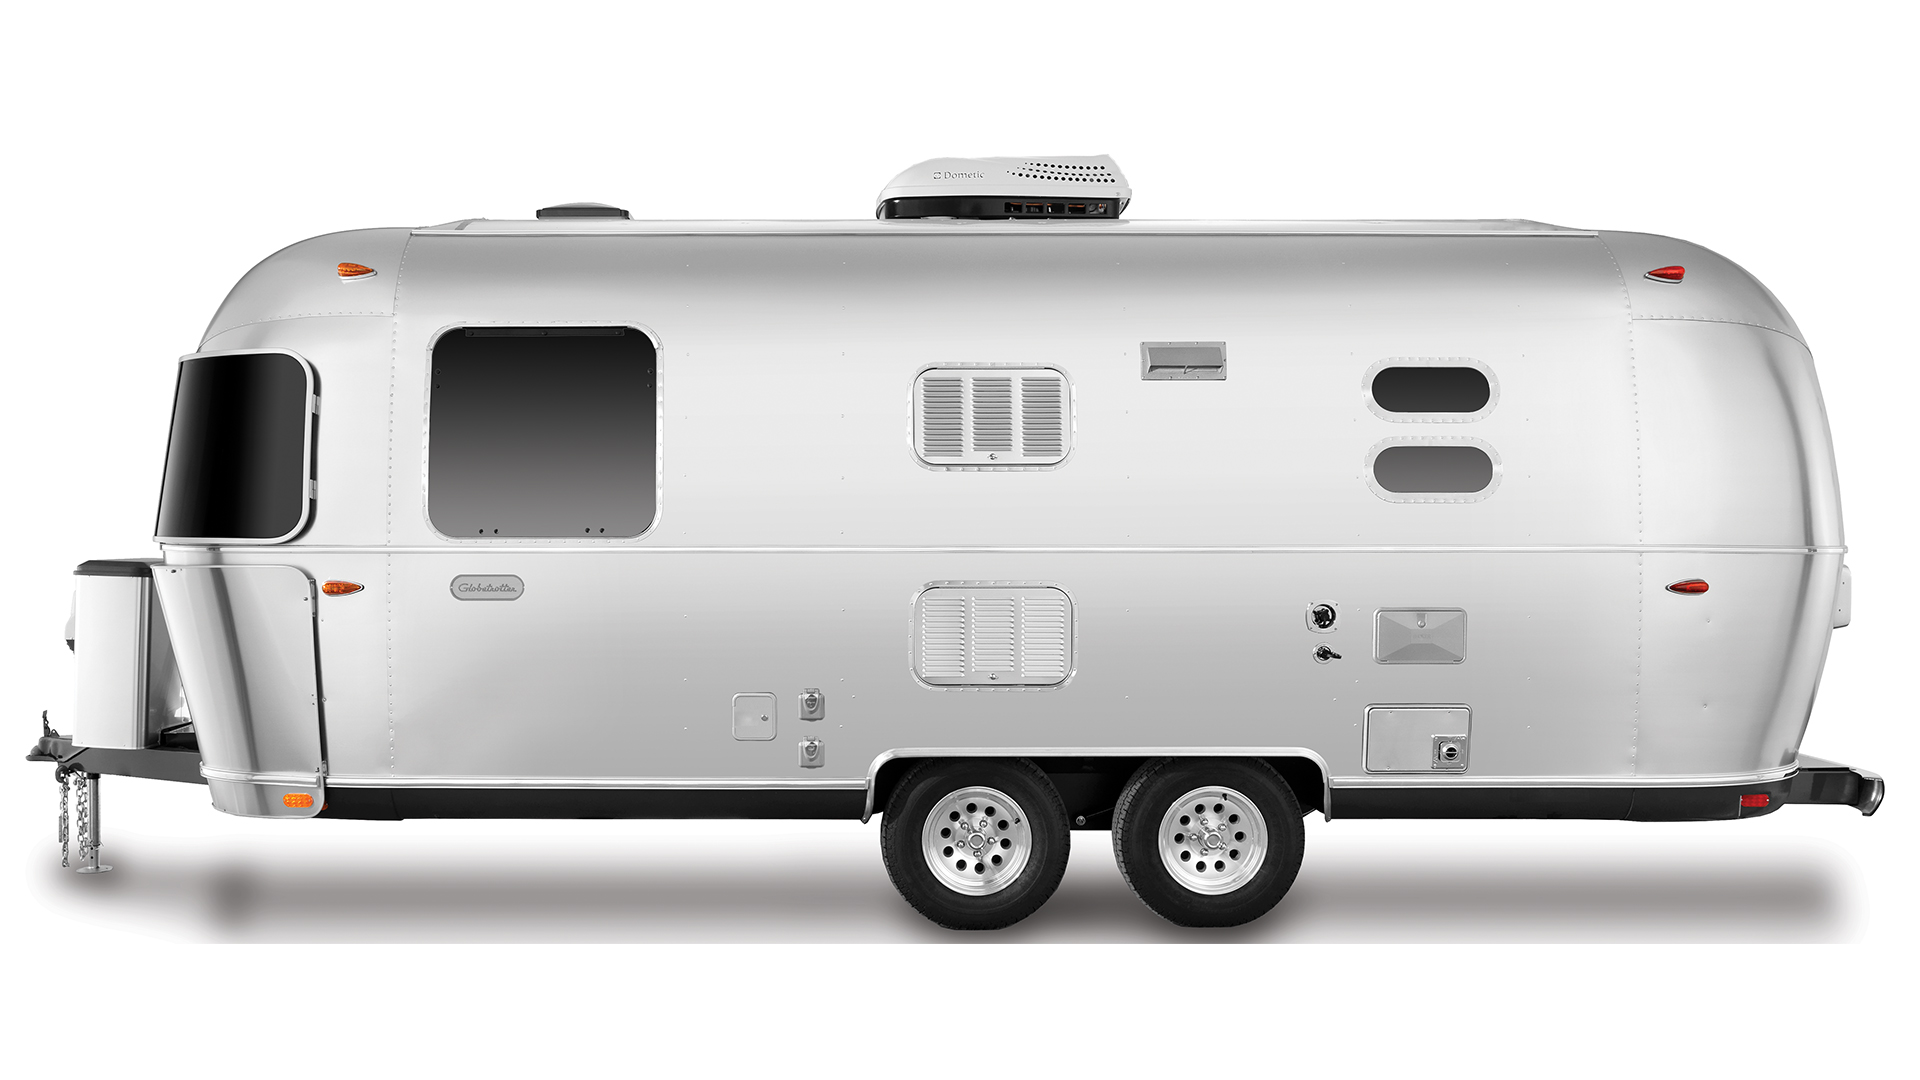 Airstream Globetrotter 23 Front Bed Queen Trailer